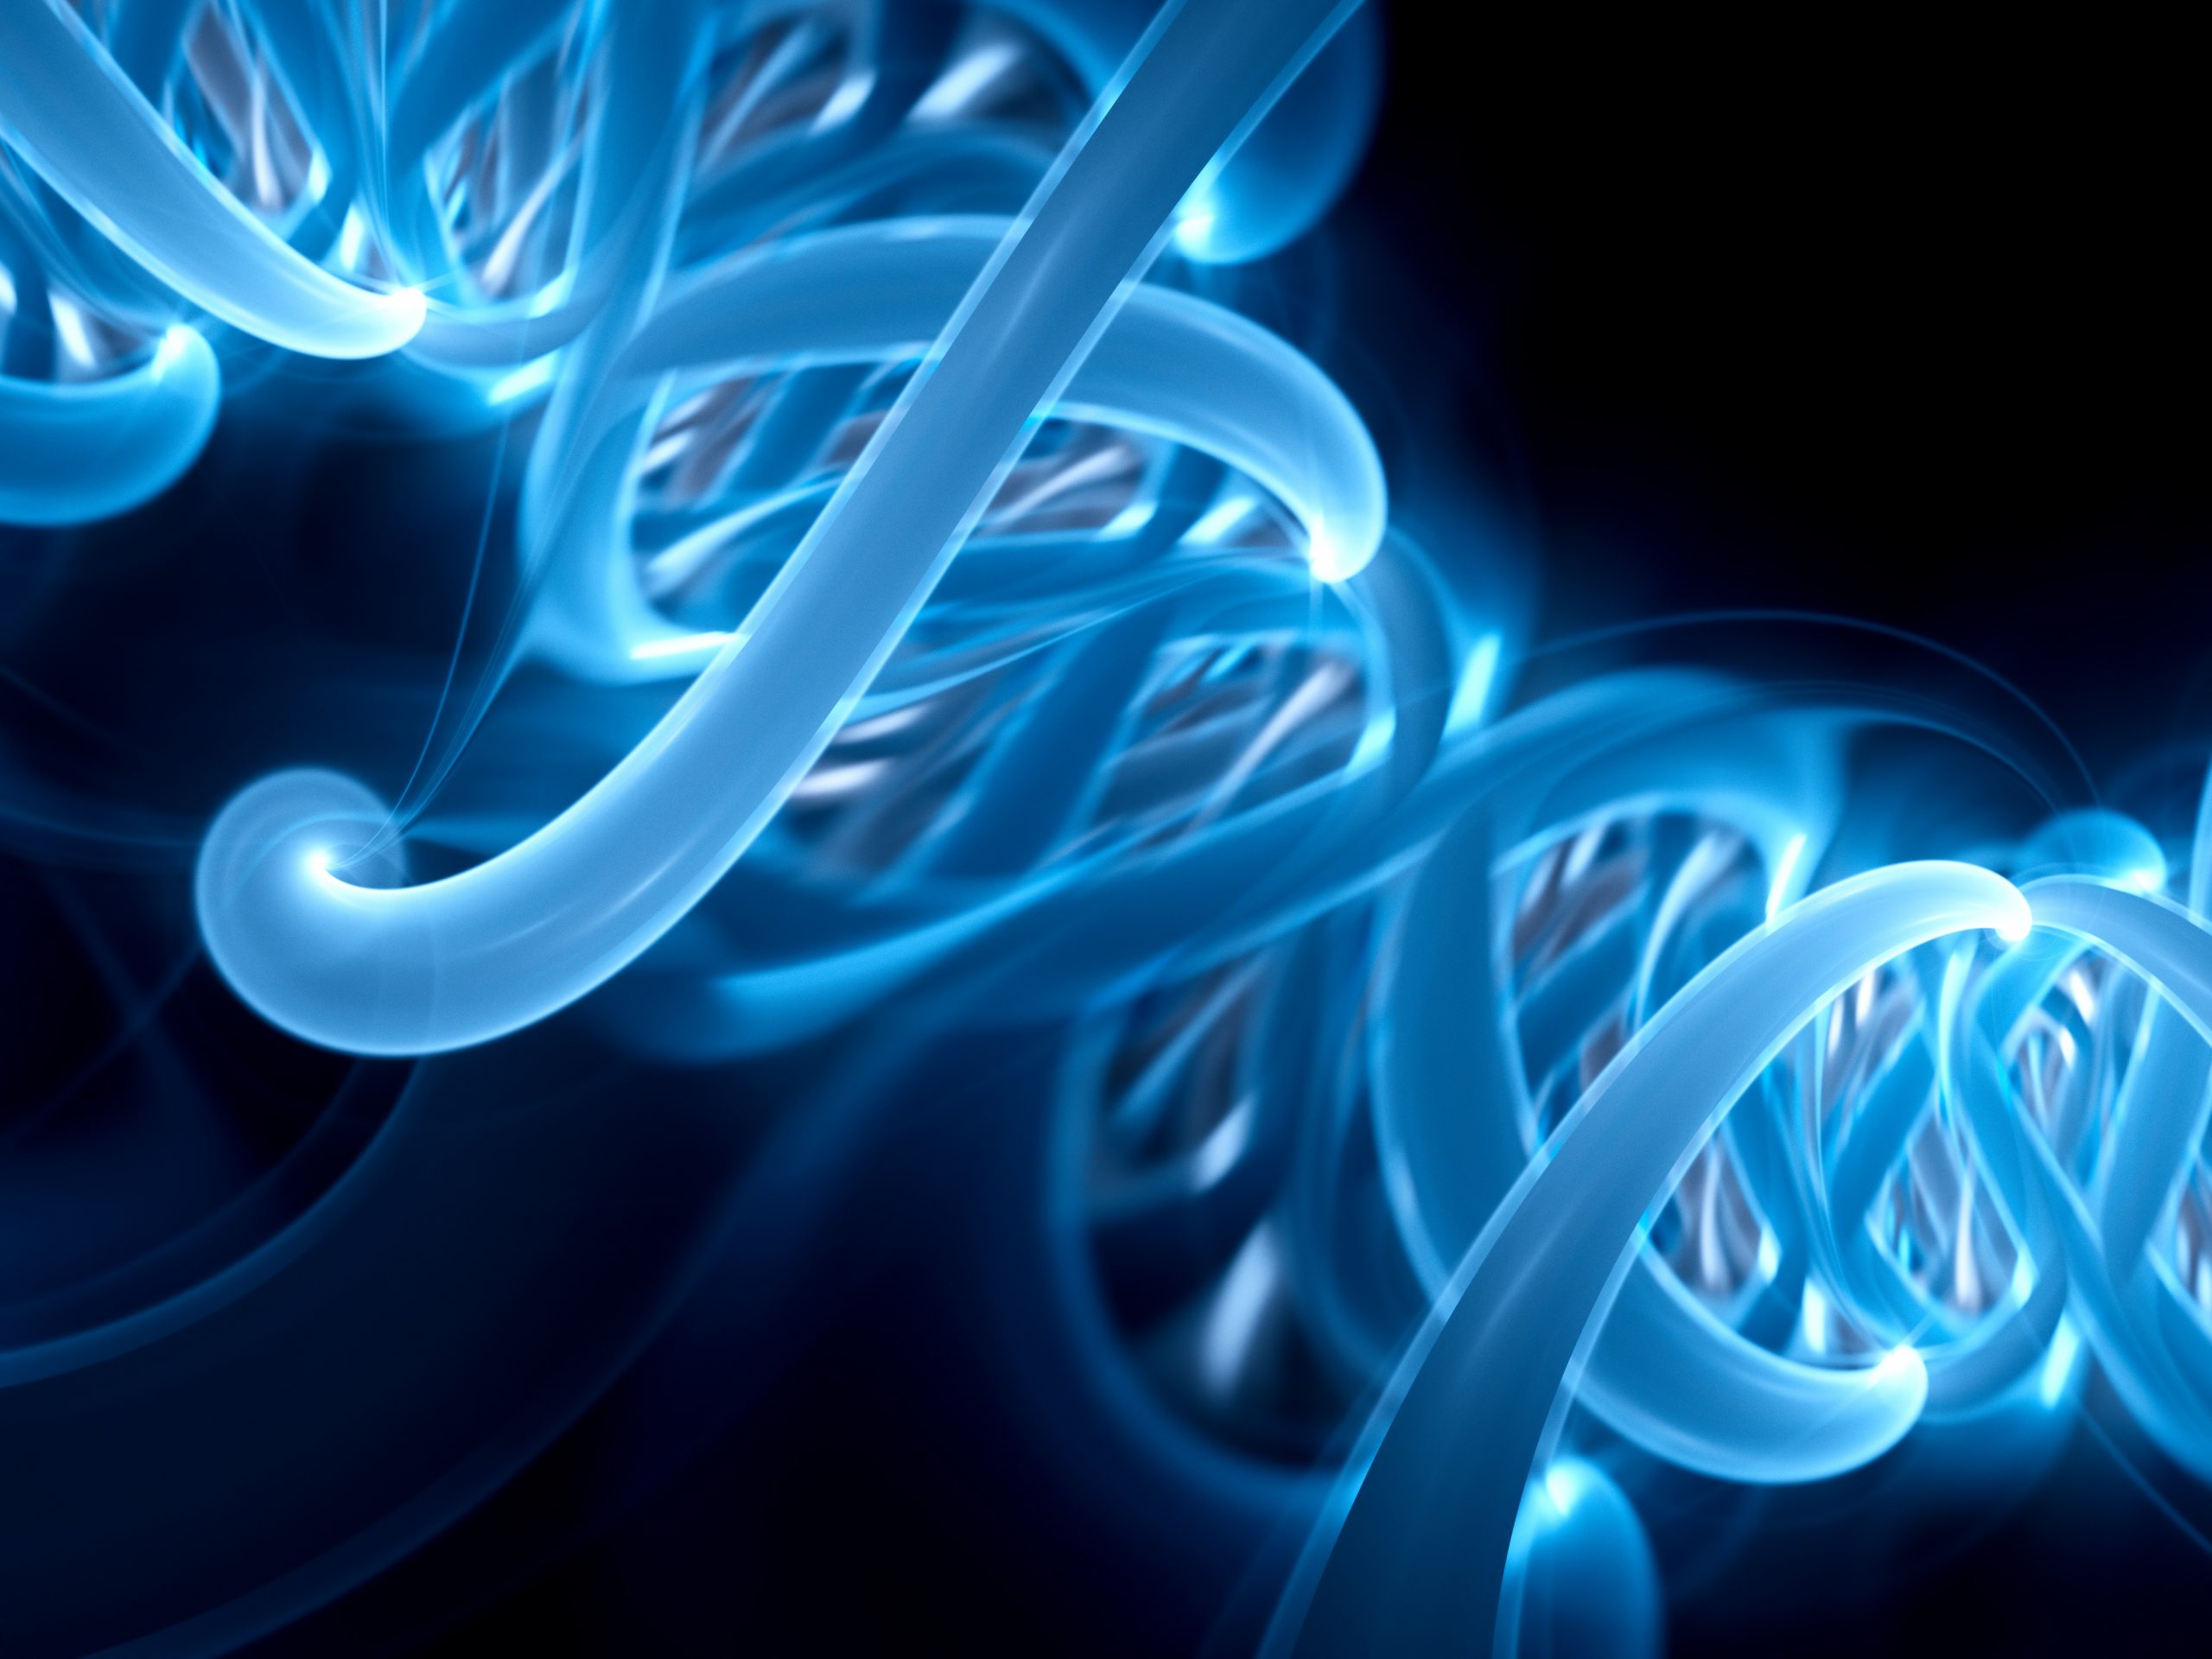 Blue glowing DNA spiral - Links to Peak Proteins case study